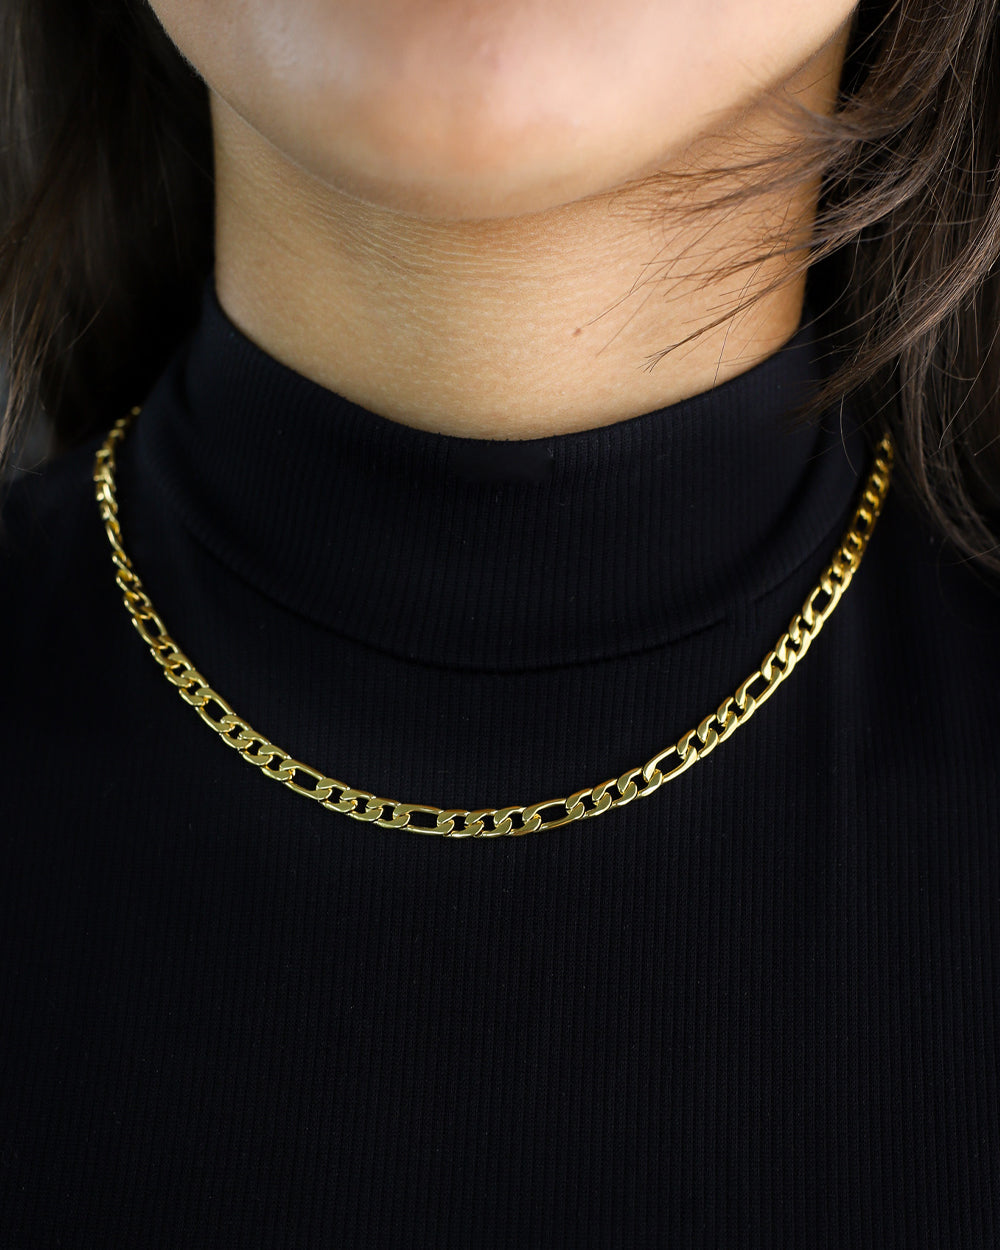 CLEAN FIGARO CHAIN. - 5MM 18K GOLD